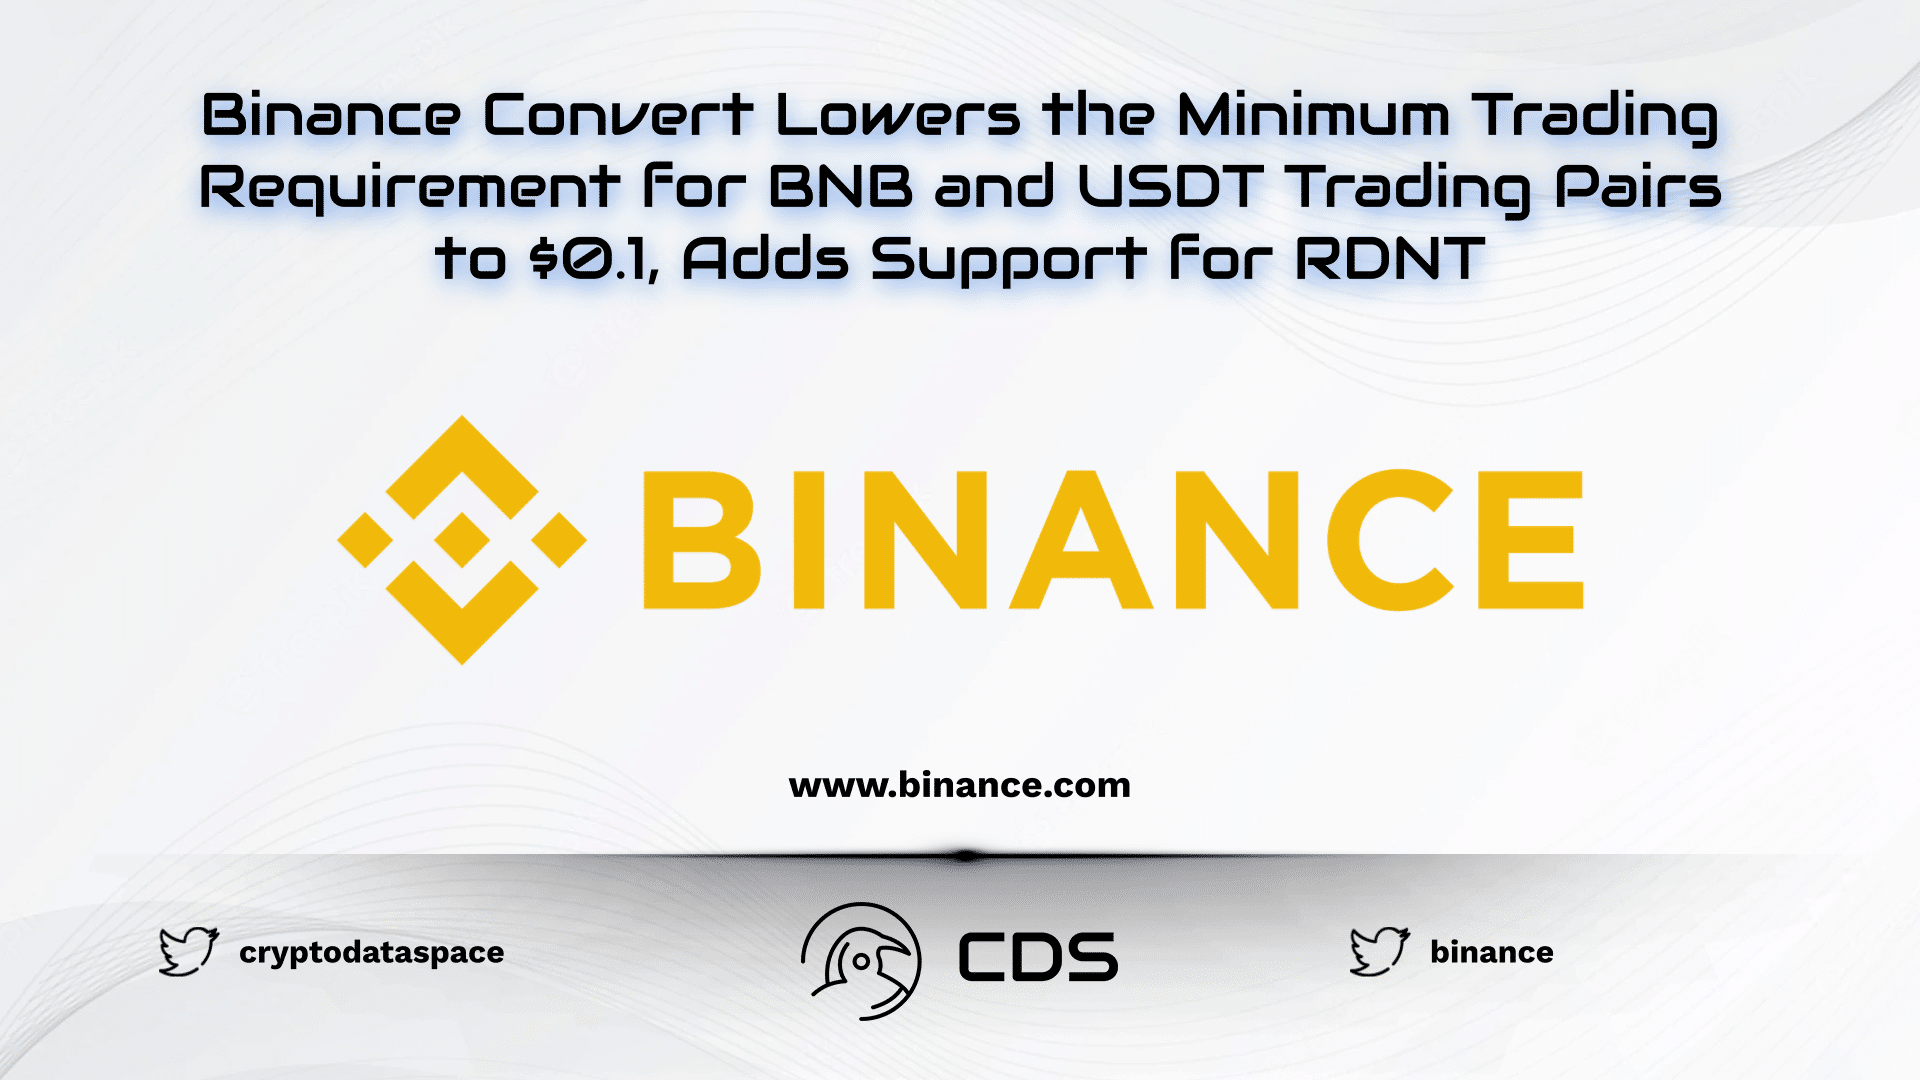 Binance Convert Lowers the Minimum Trading Requirement for BNB and USDT Trading Pairs to $0.1, Adds Support for RDNT